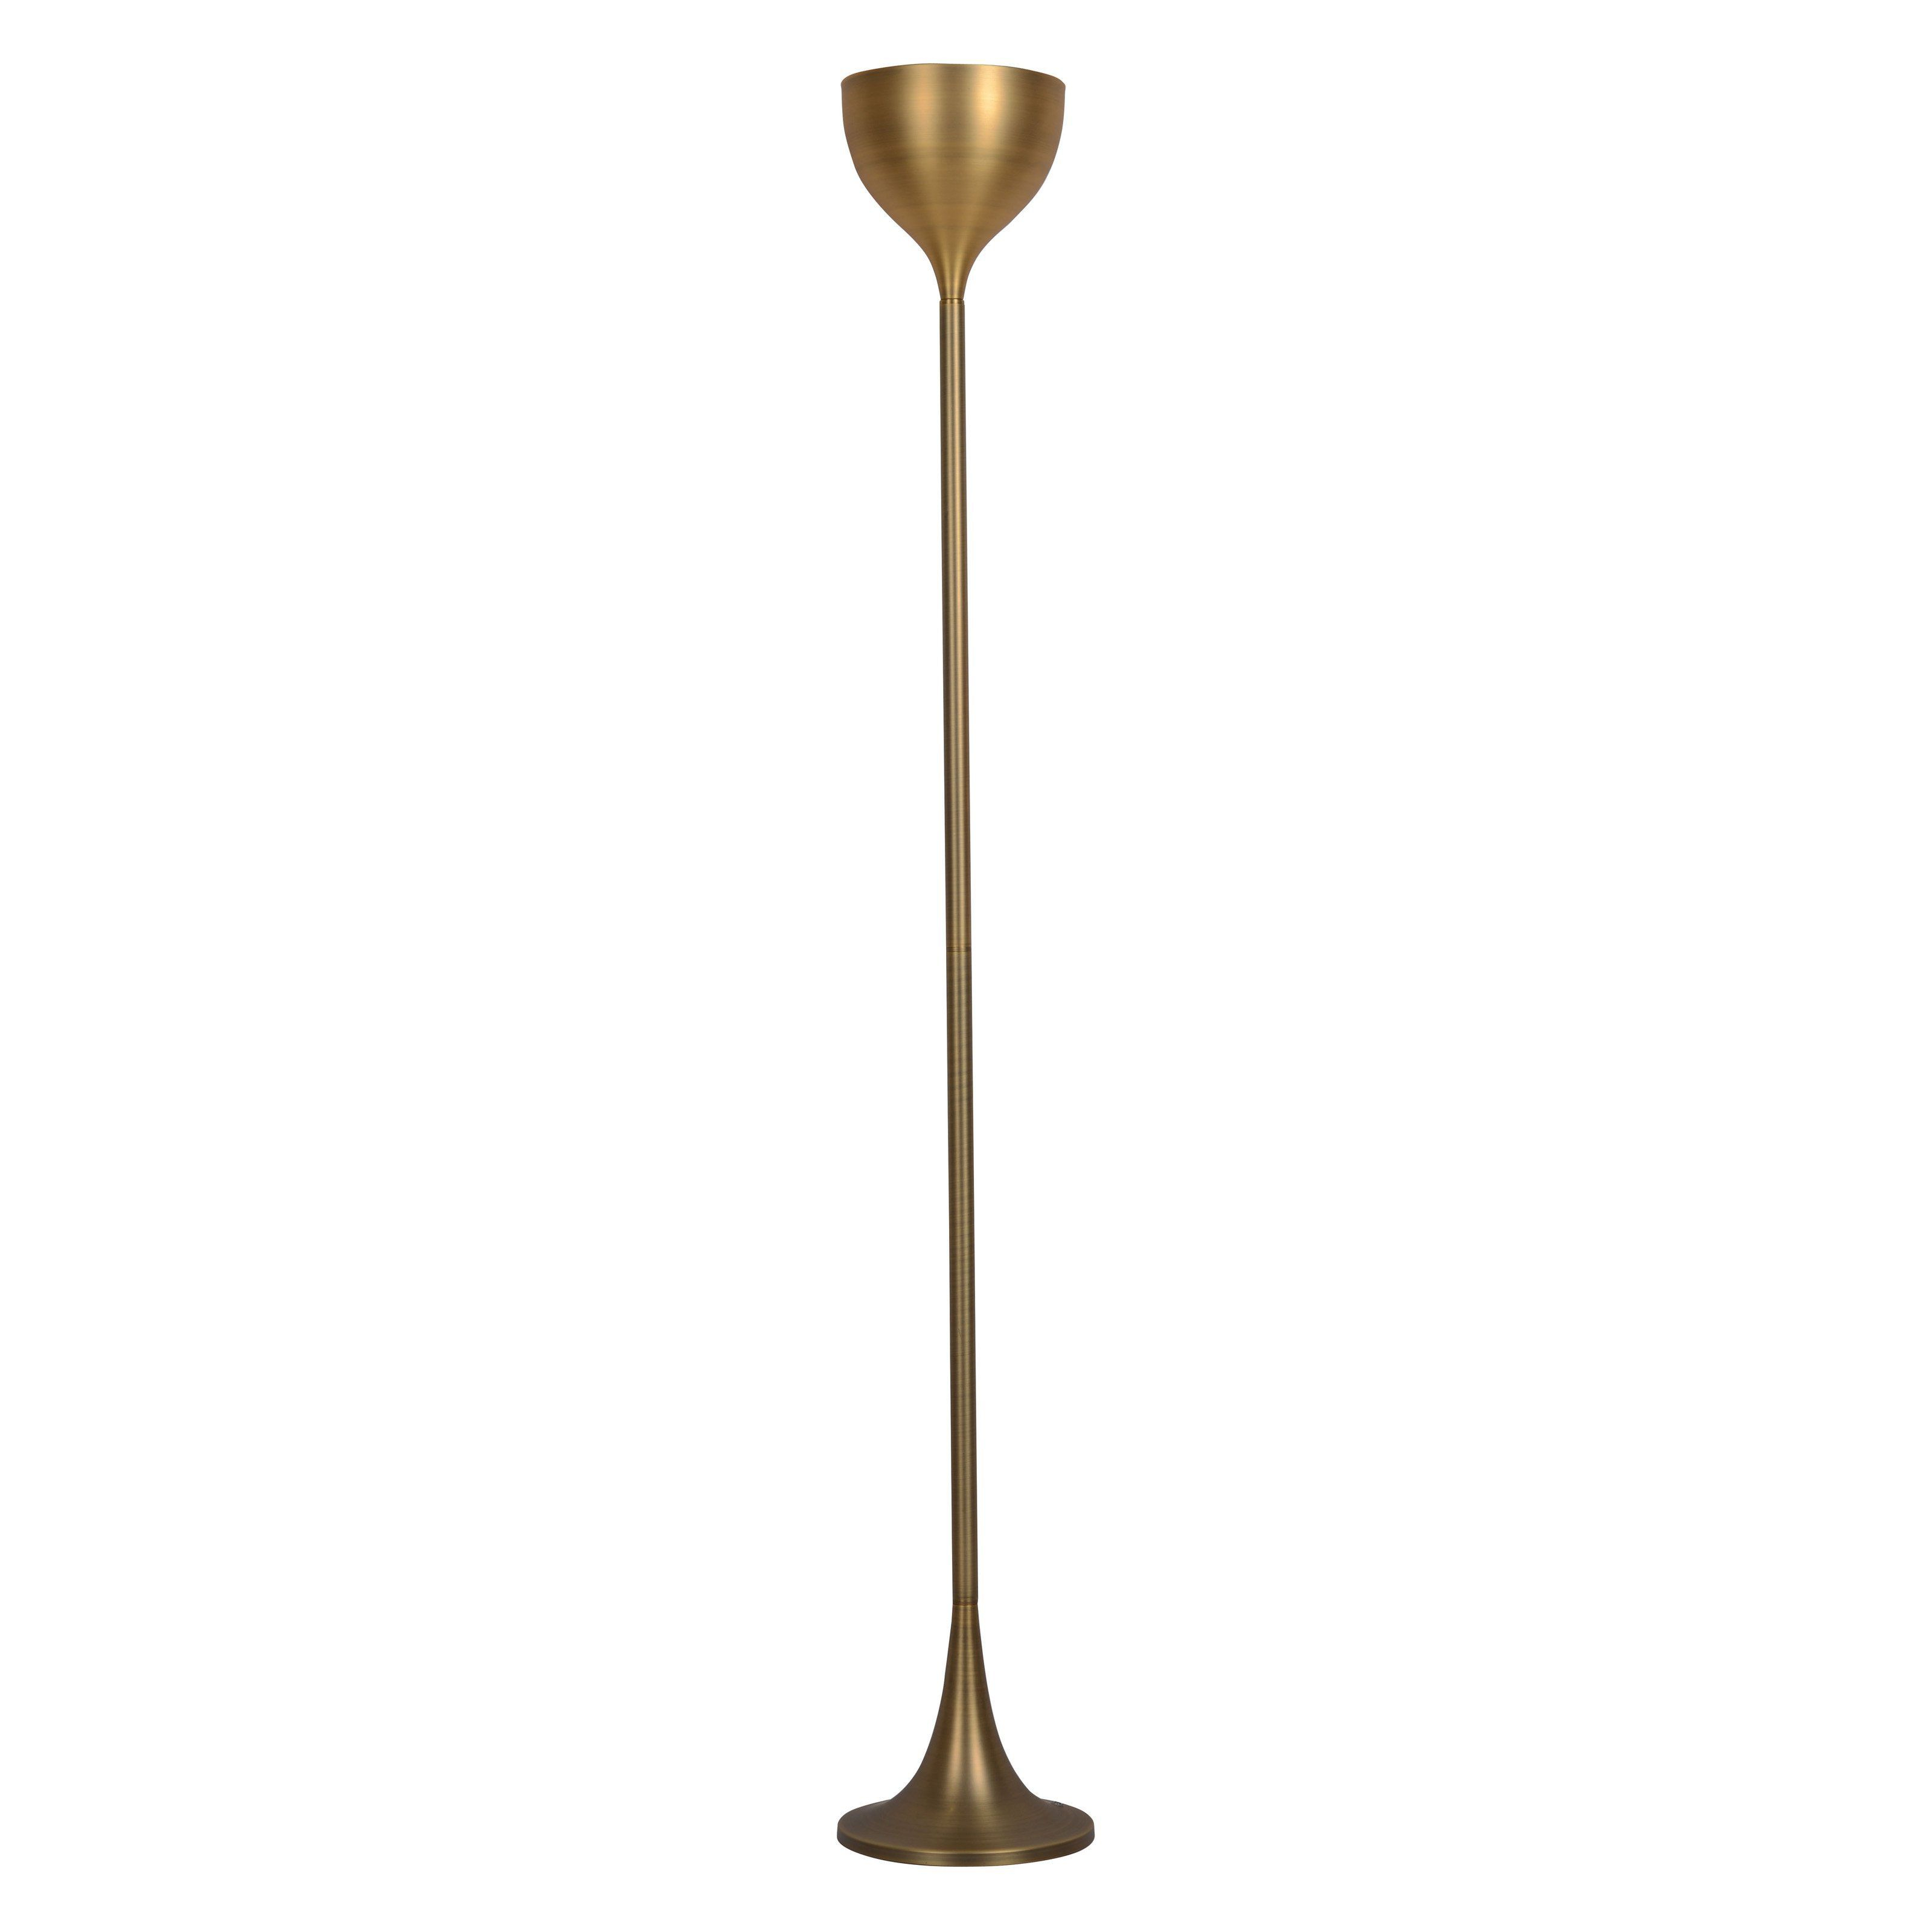 Pangea Home Victoria Torchiere Floor Lamp Elegant Curves pertaining to size 3200 X 3200